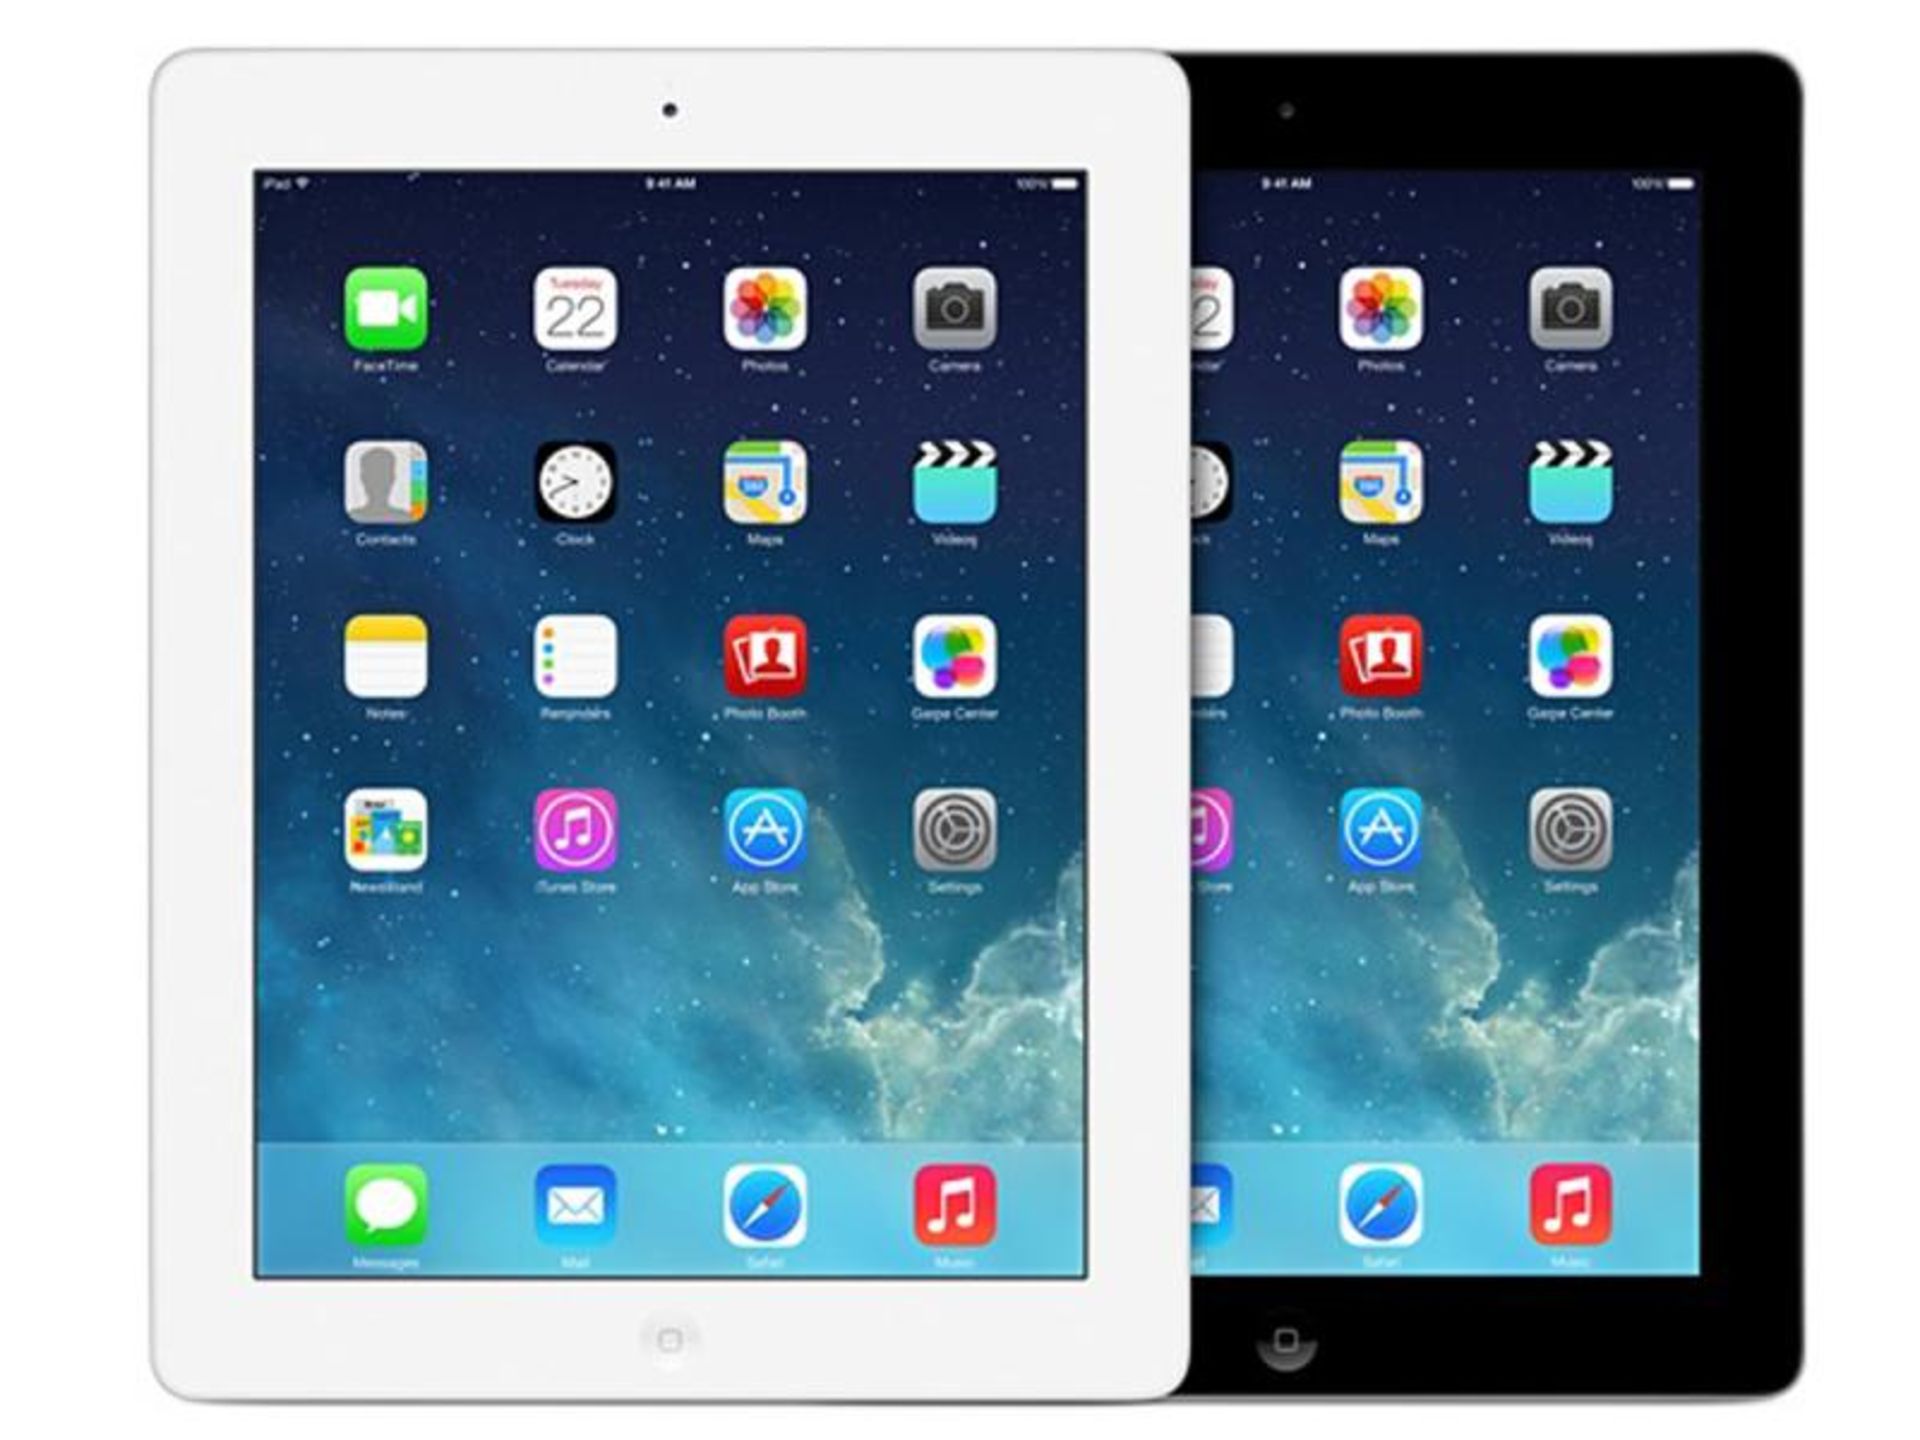 V Grade B Apple iPad 4 16GB (Colours may vary) Unit Only X 2 YOUR BID PRICE TO BE MULTIPLIED BY TWO